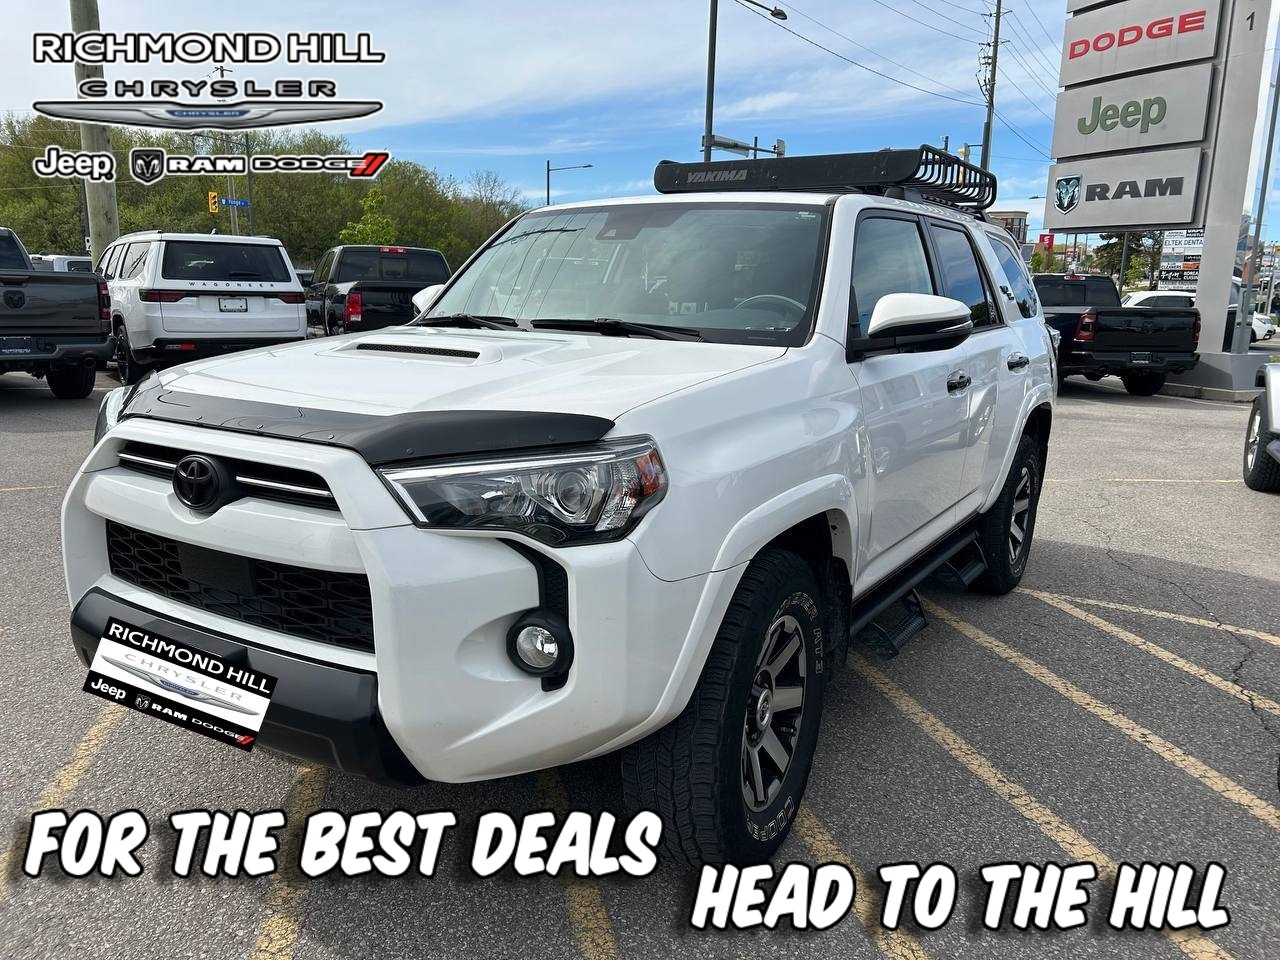 2020 Toyota 4Runner 4WD TRD (Incoming unit) call for price